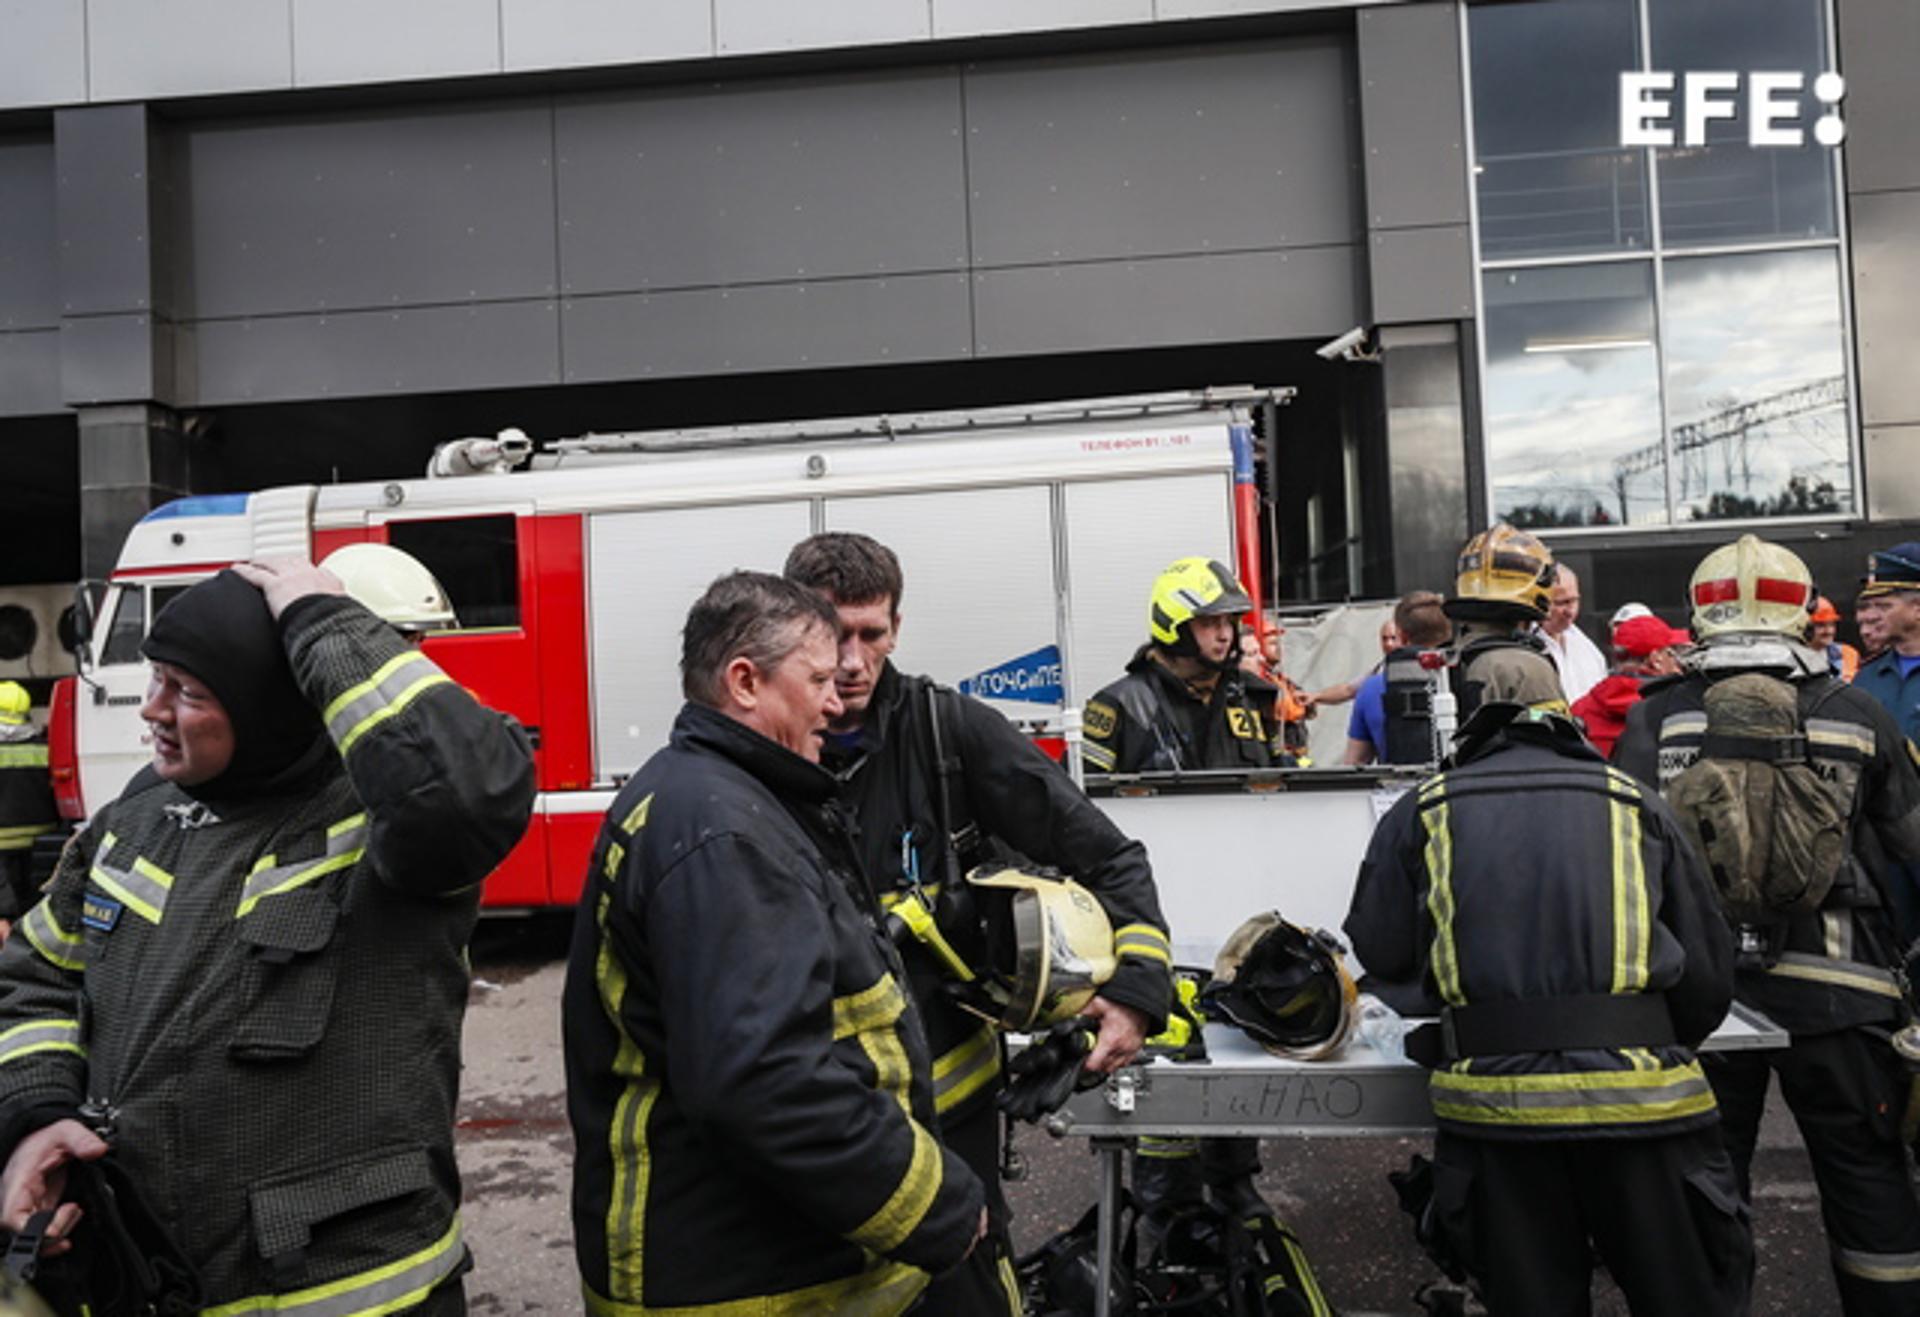 First responders at work after a hot water pipe burst inside a shopping center in Moscow on 22 July 2023. Four people were killed and others suffered severe burns. EFE/EPA/YURI KOCHETKOV
